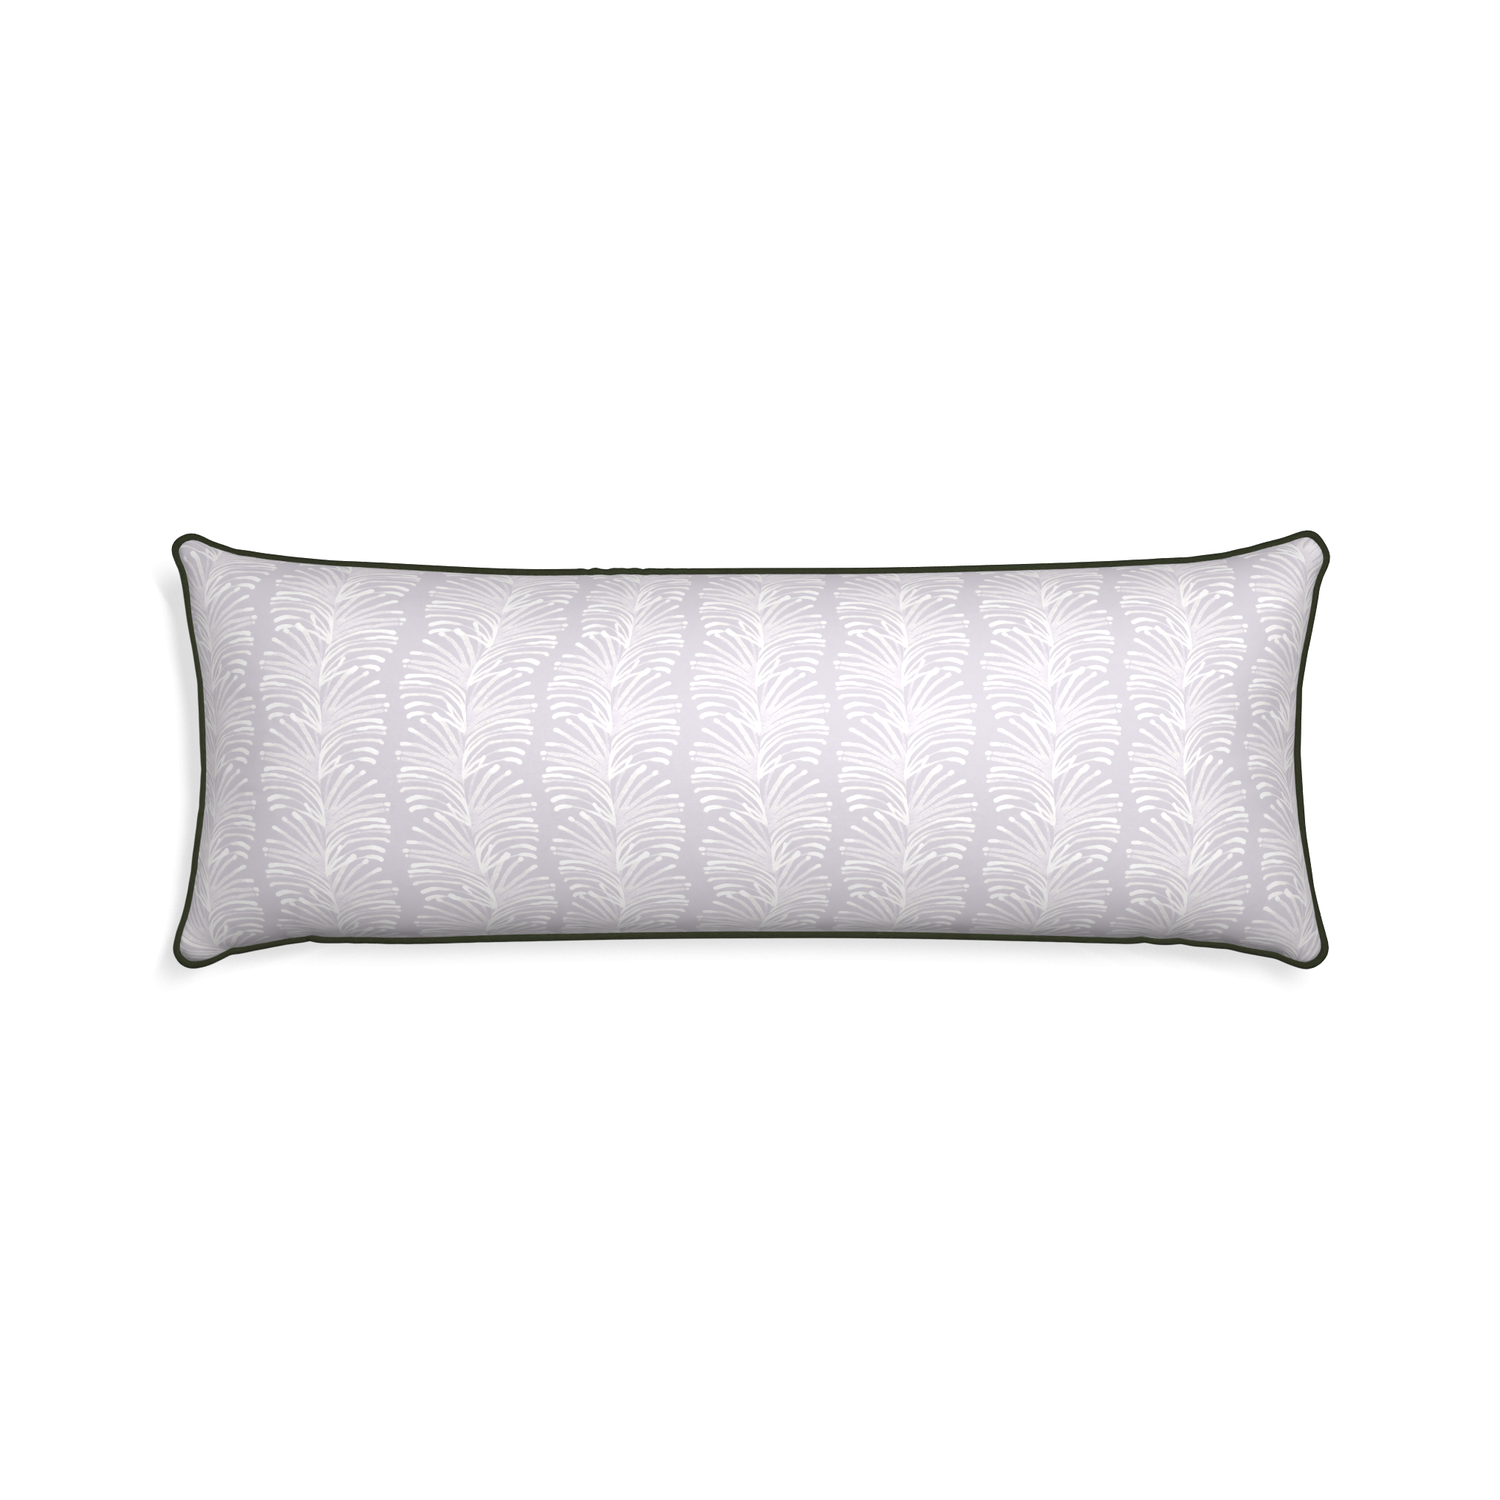 Xl-lumbar emma lavender custom lavender botanical stripepillow with f piping on white background